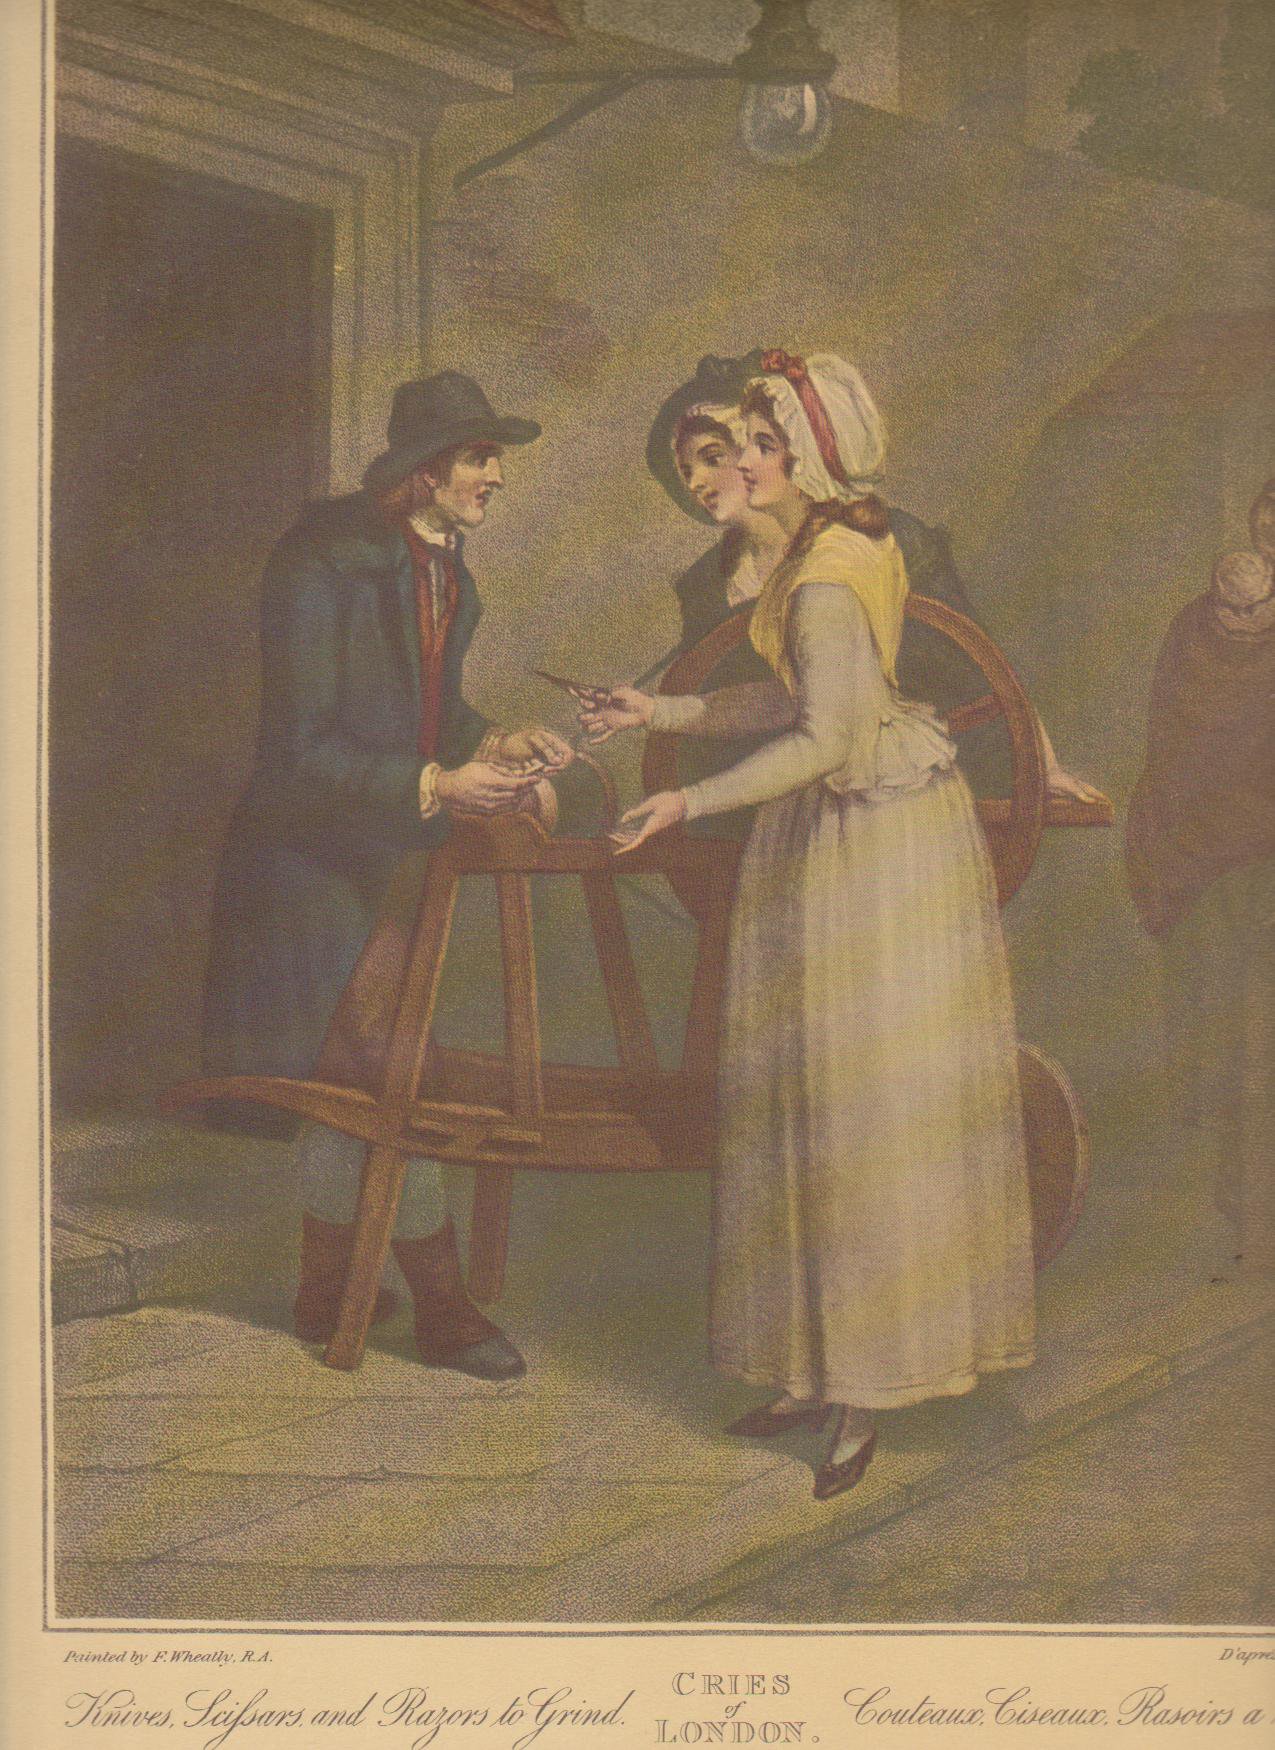 Cries of London - Francis Wheatley - Knives Scissors and Razors to Grind  - 1793 - Eighteenth Century fashion - History of Street sellers Clothing - Undress - 18th Cent Everyday clothing - HandBound Research